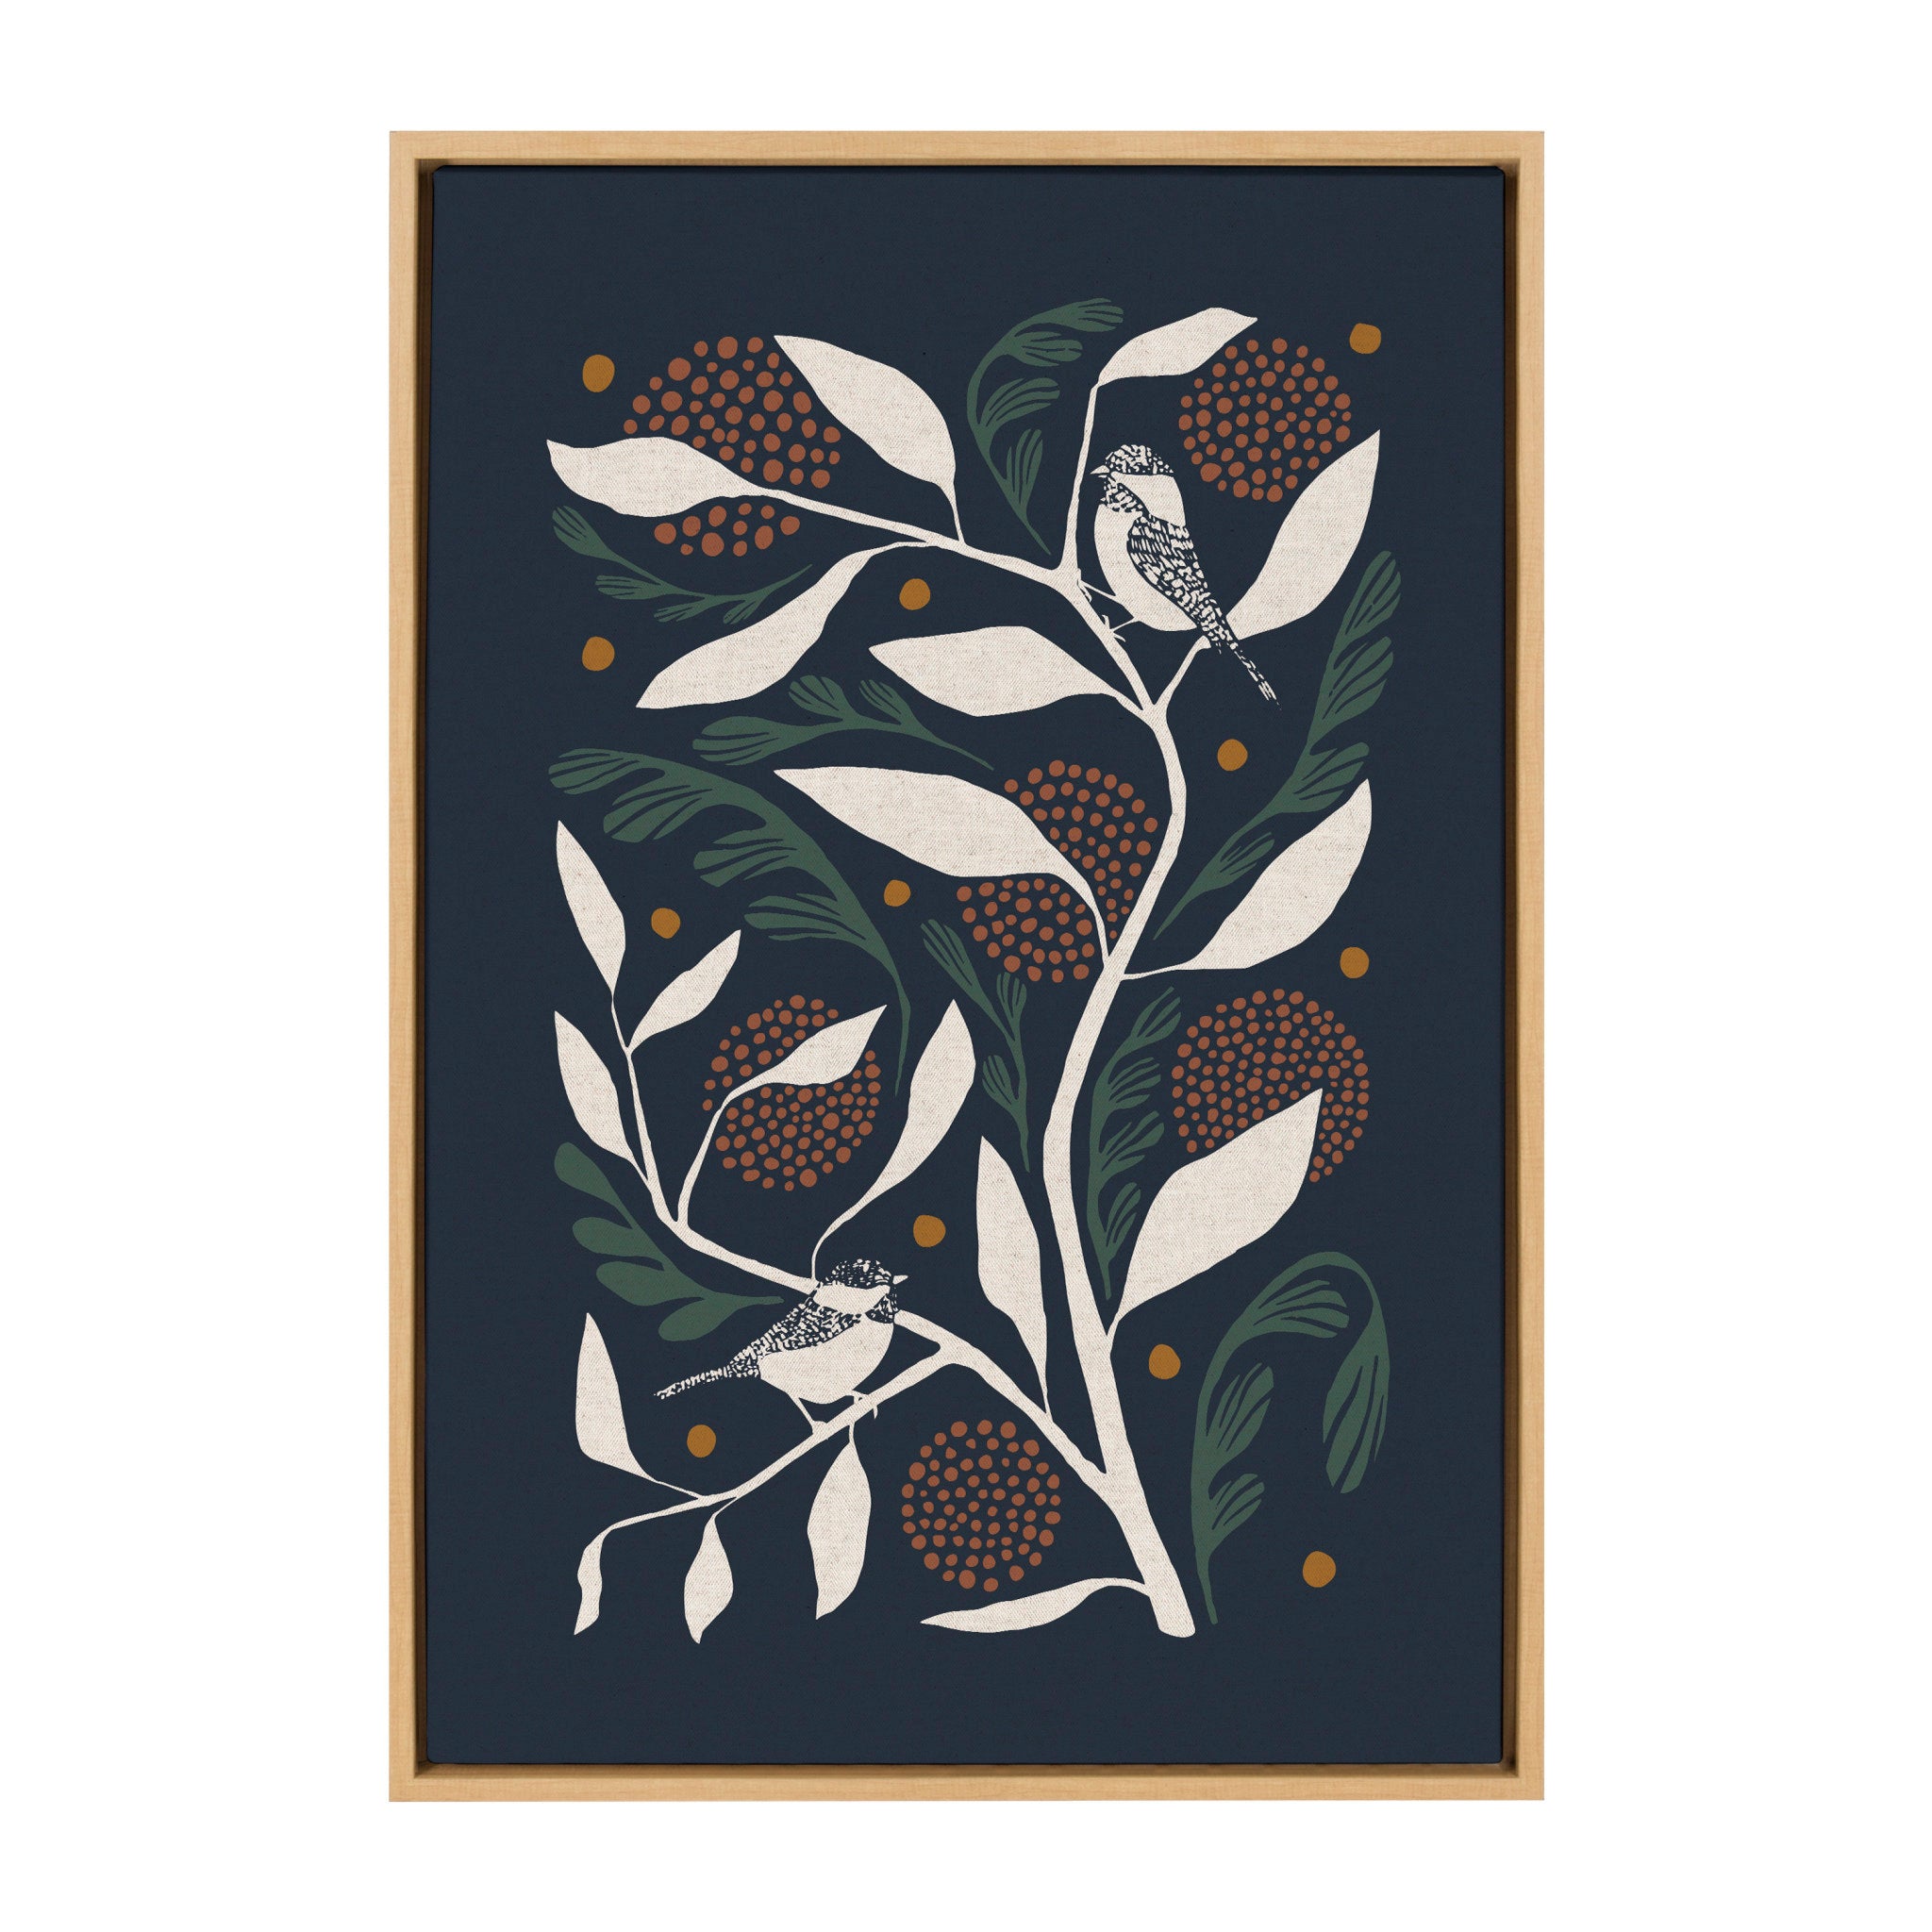 Sylvie HB Duo Bird Branch Framed Canvas by Hannah Beisang